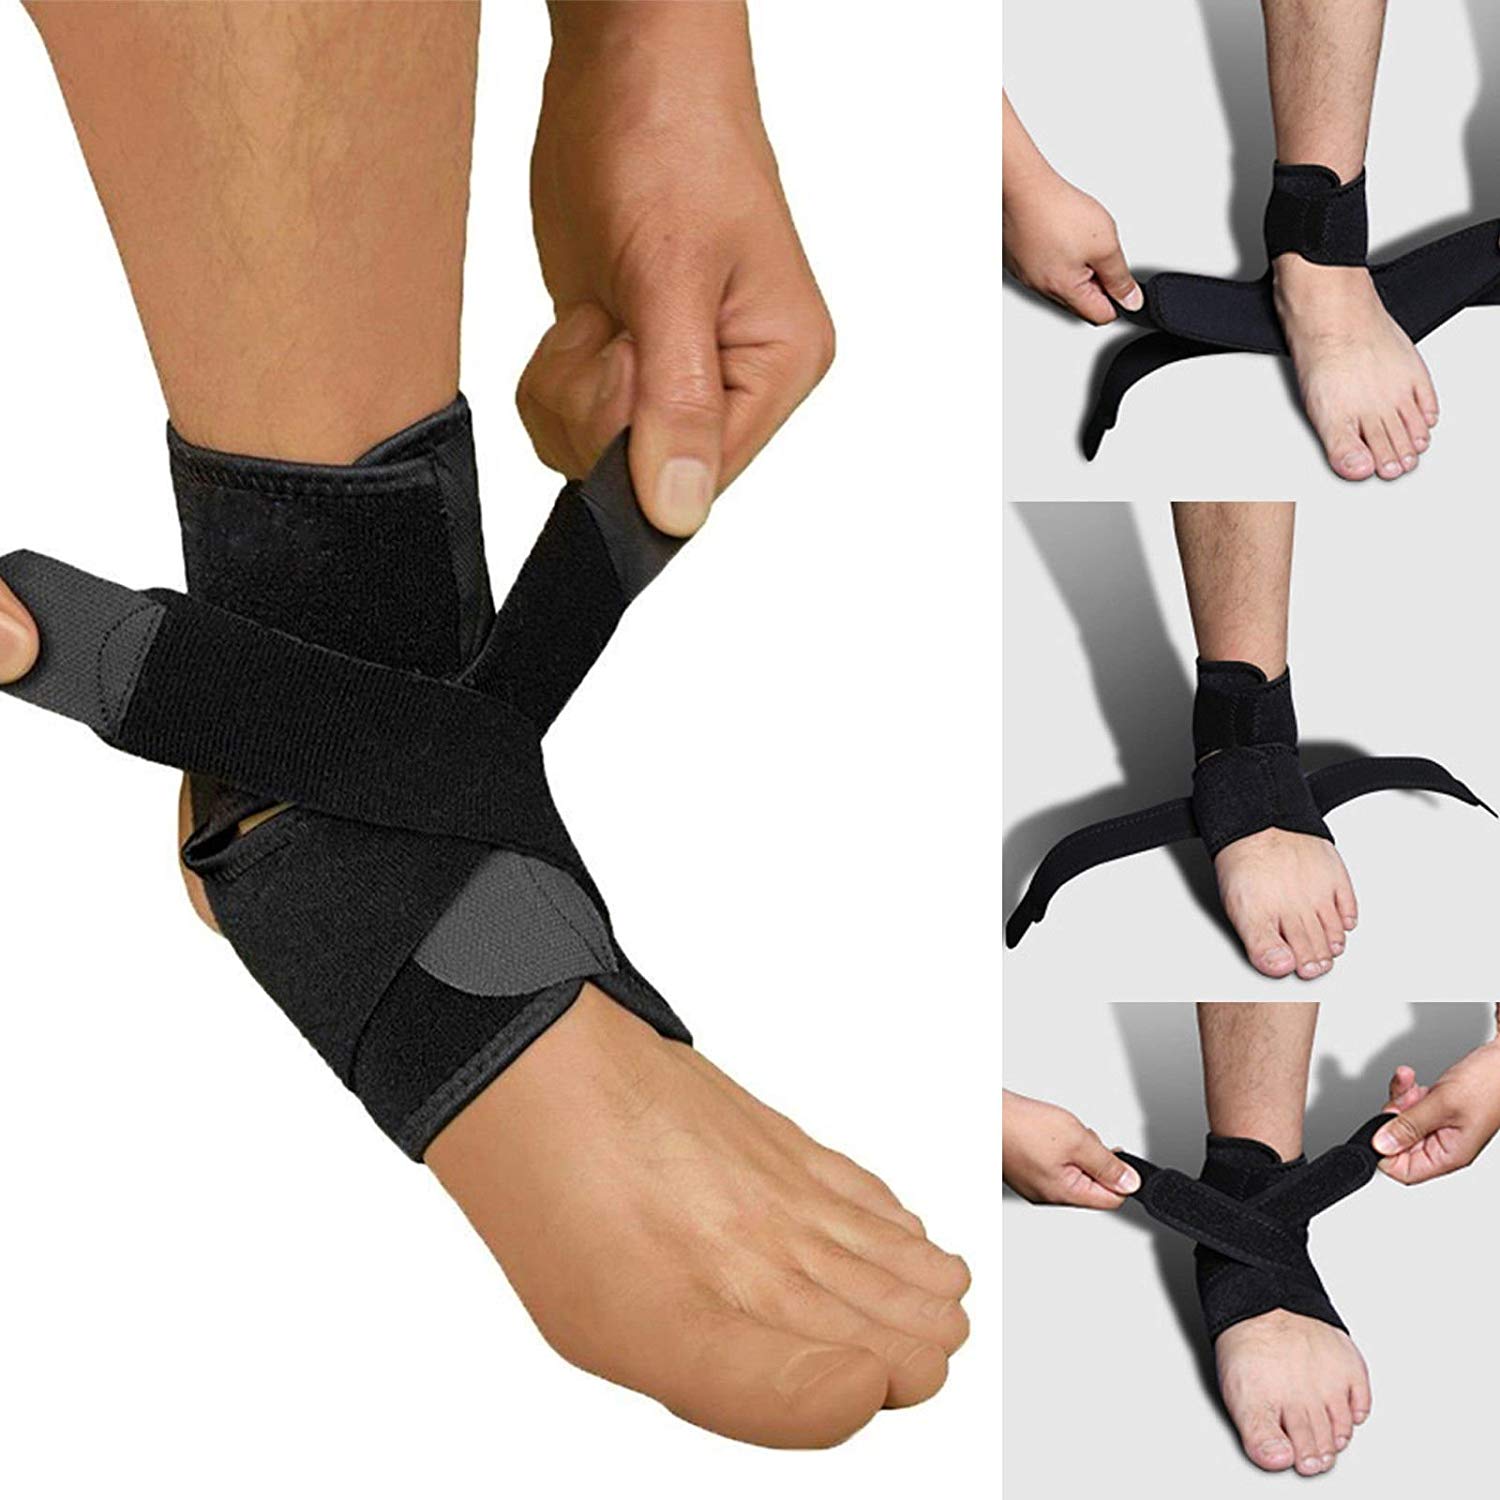 NUCARTURE® Ankle Support with Brace and Sleeve & Bandage Wrap For Foot Compression Brace Guard Brace for Arthritis, Pain Relief, Sprains, Sports Injuries